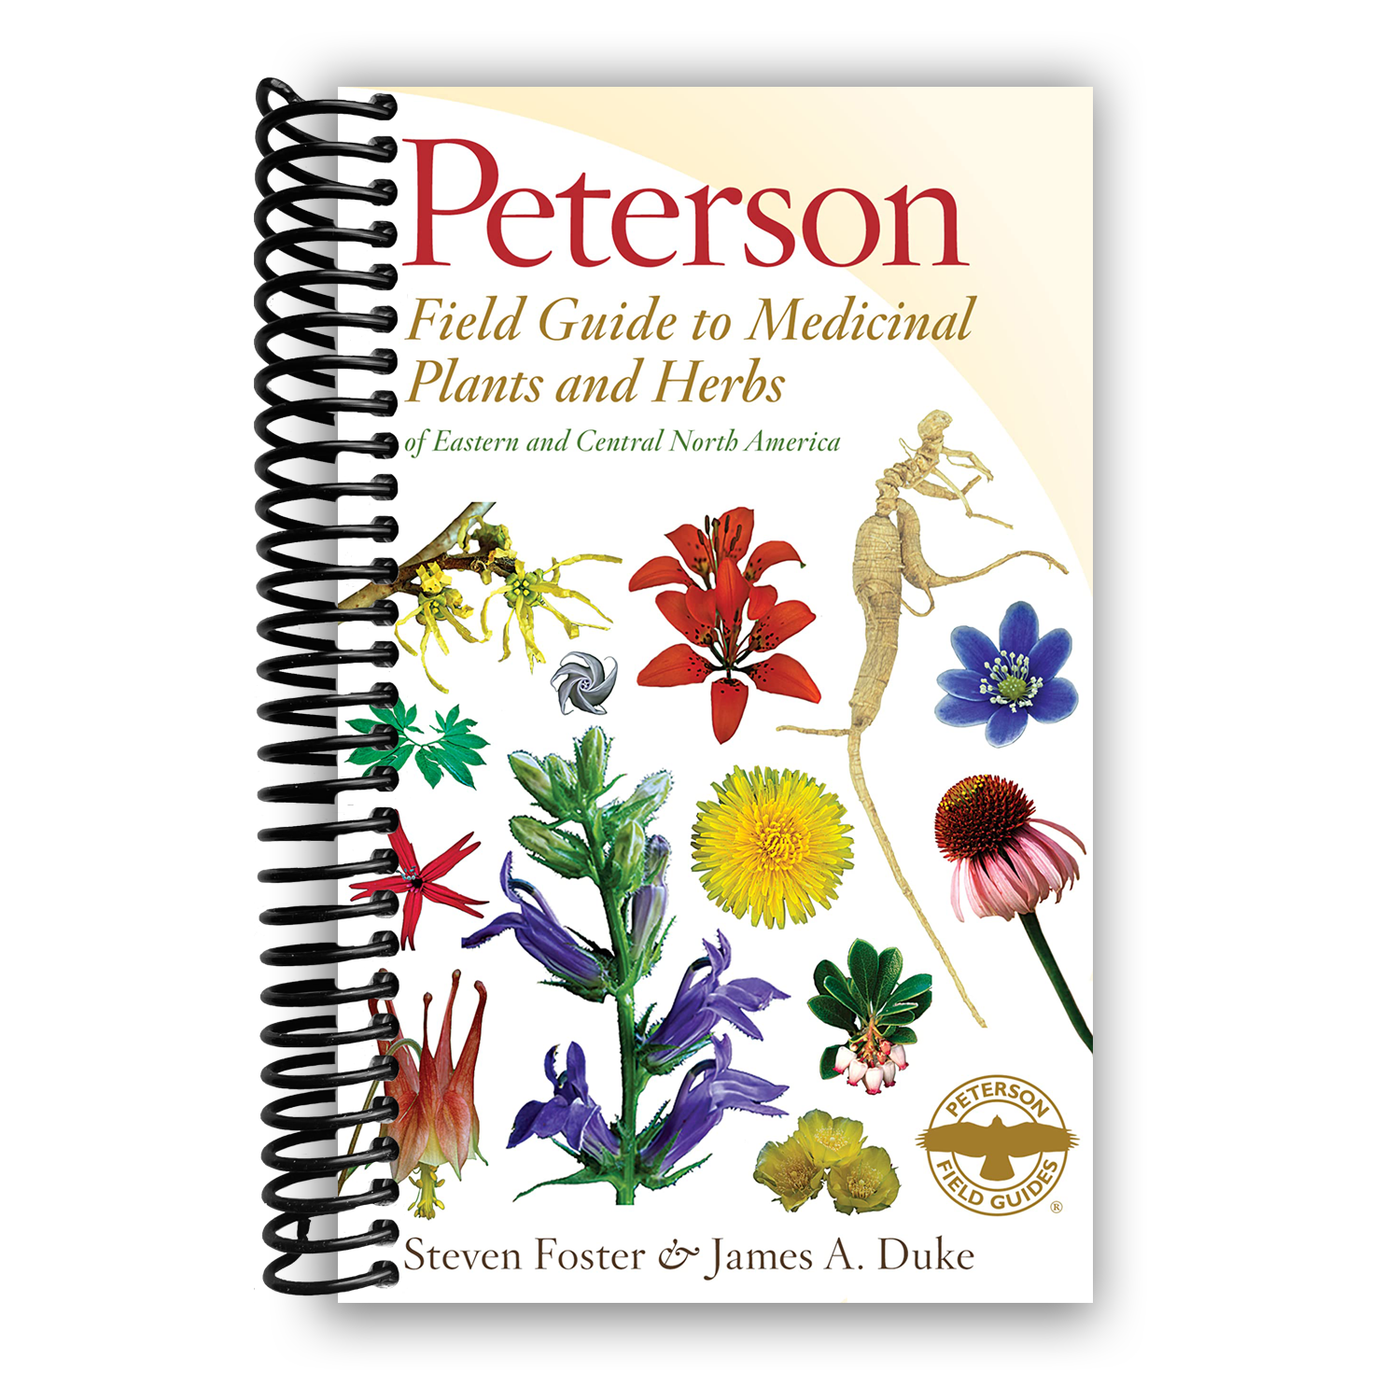 Peterson Field Guide To Medicinal Plants & Herbs Of Eastern & Central N. America: Third Edition (Spiral Bound)